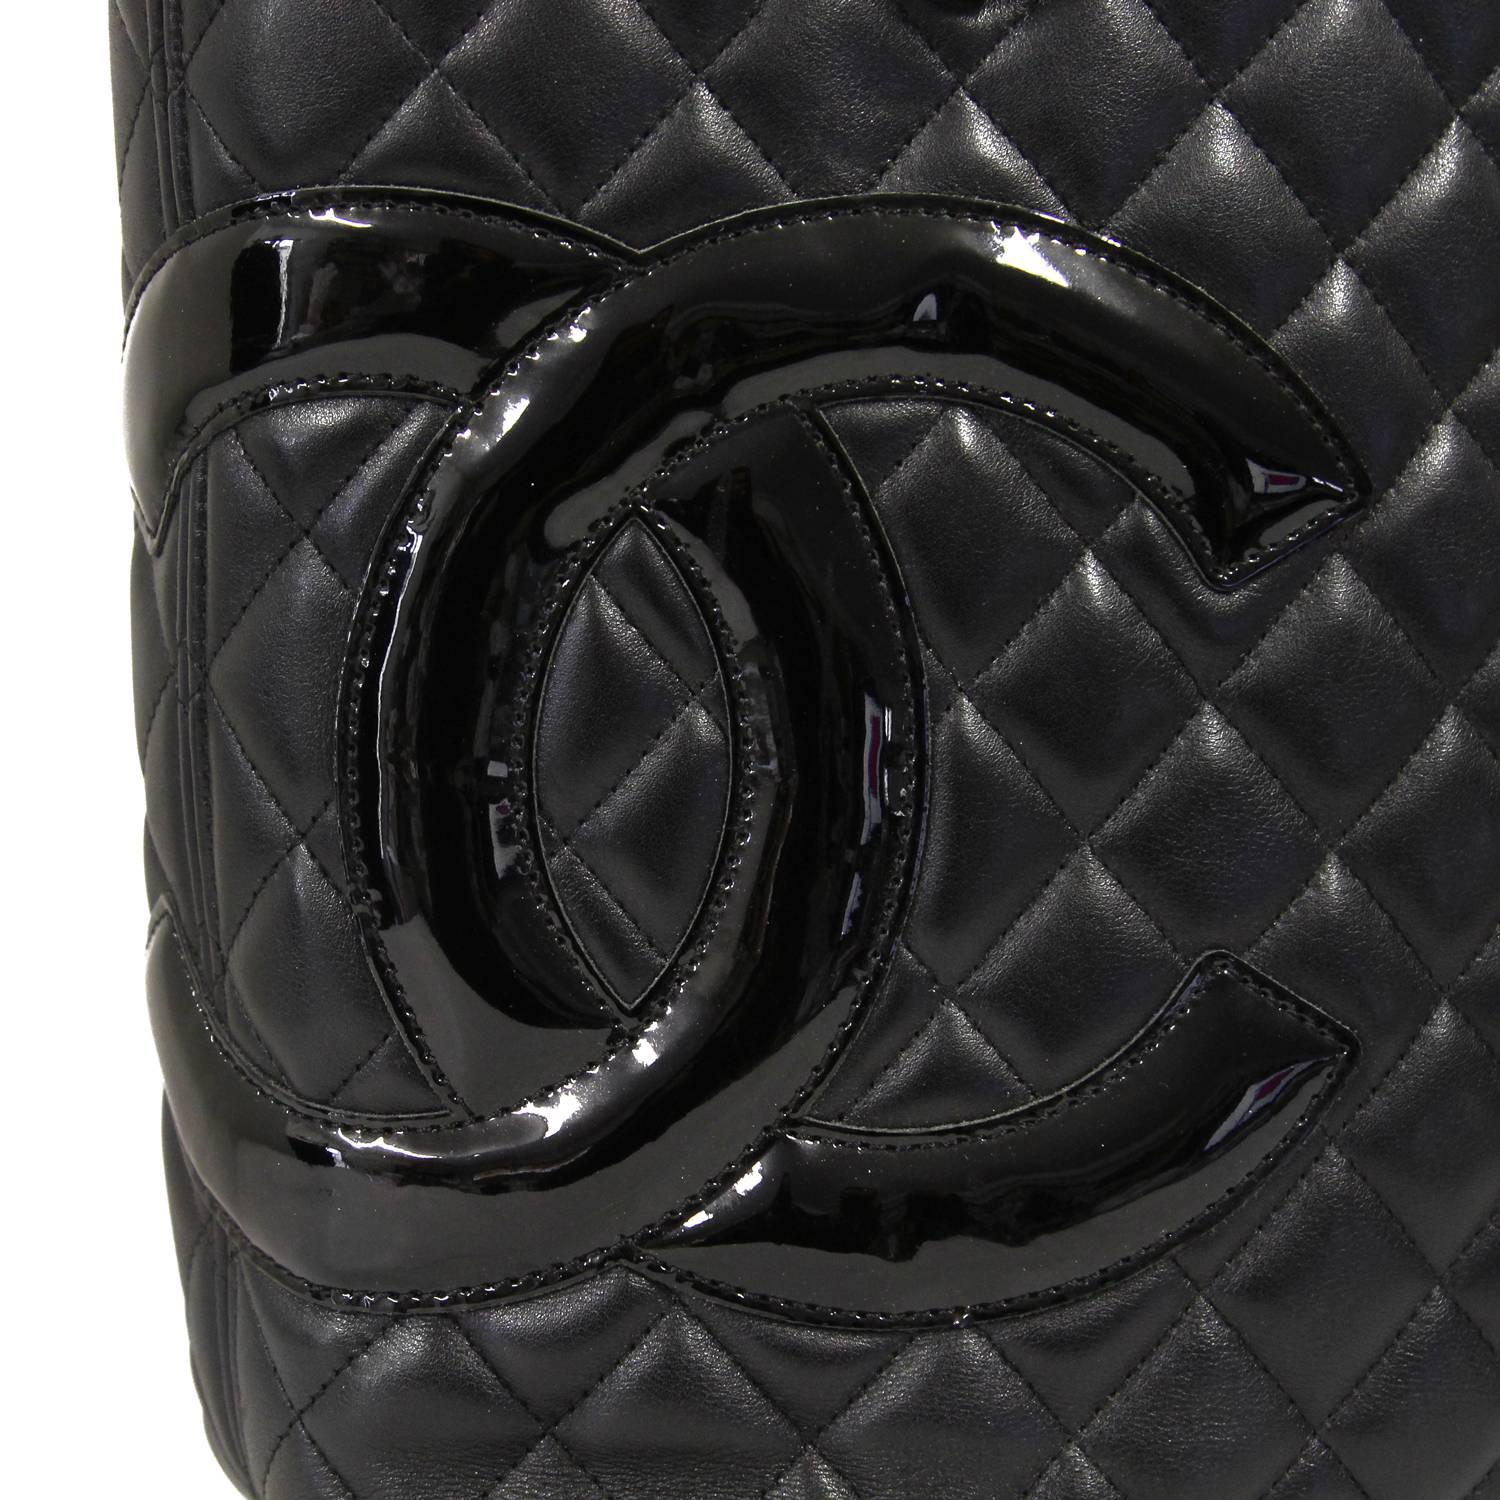 Beautiful black matelassé leather Rue Cambon bag by Chanel, featuring logo lining, two top handles, an external pocket and a zipped closure. According to the code (12049719) the item was produced between 2008 and 2009. The item is in good